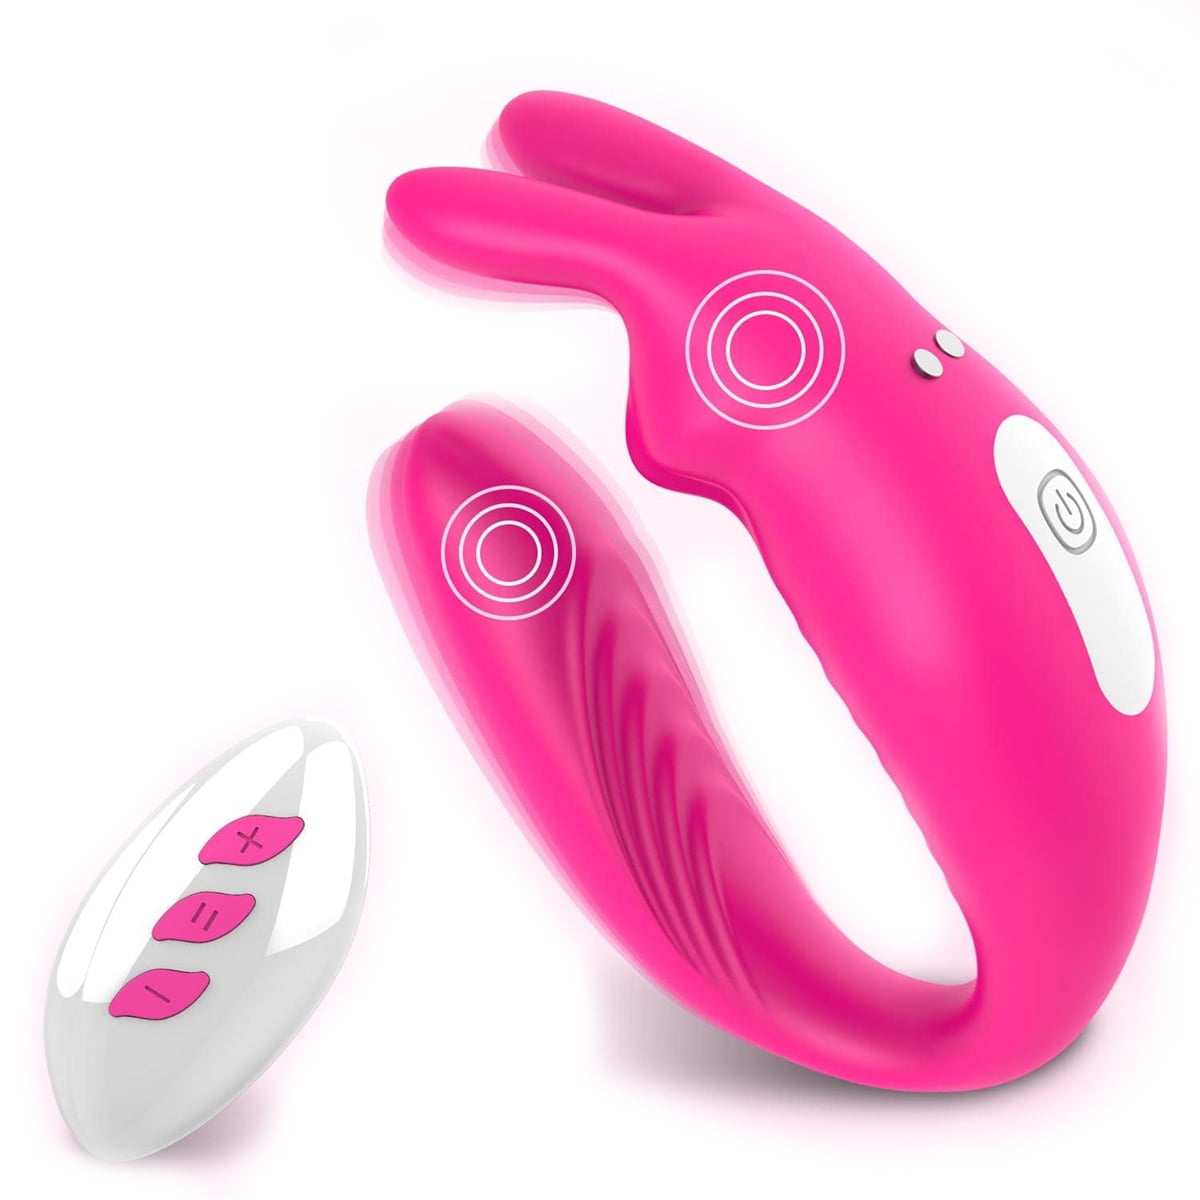 MEESE Vibrating Couple Clitoris Stimulator, with Dual Motors and 12 Vibration Patterns Vibrator , Adult Sex Toy for Women